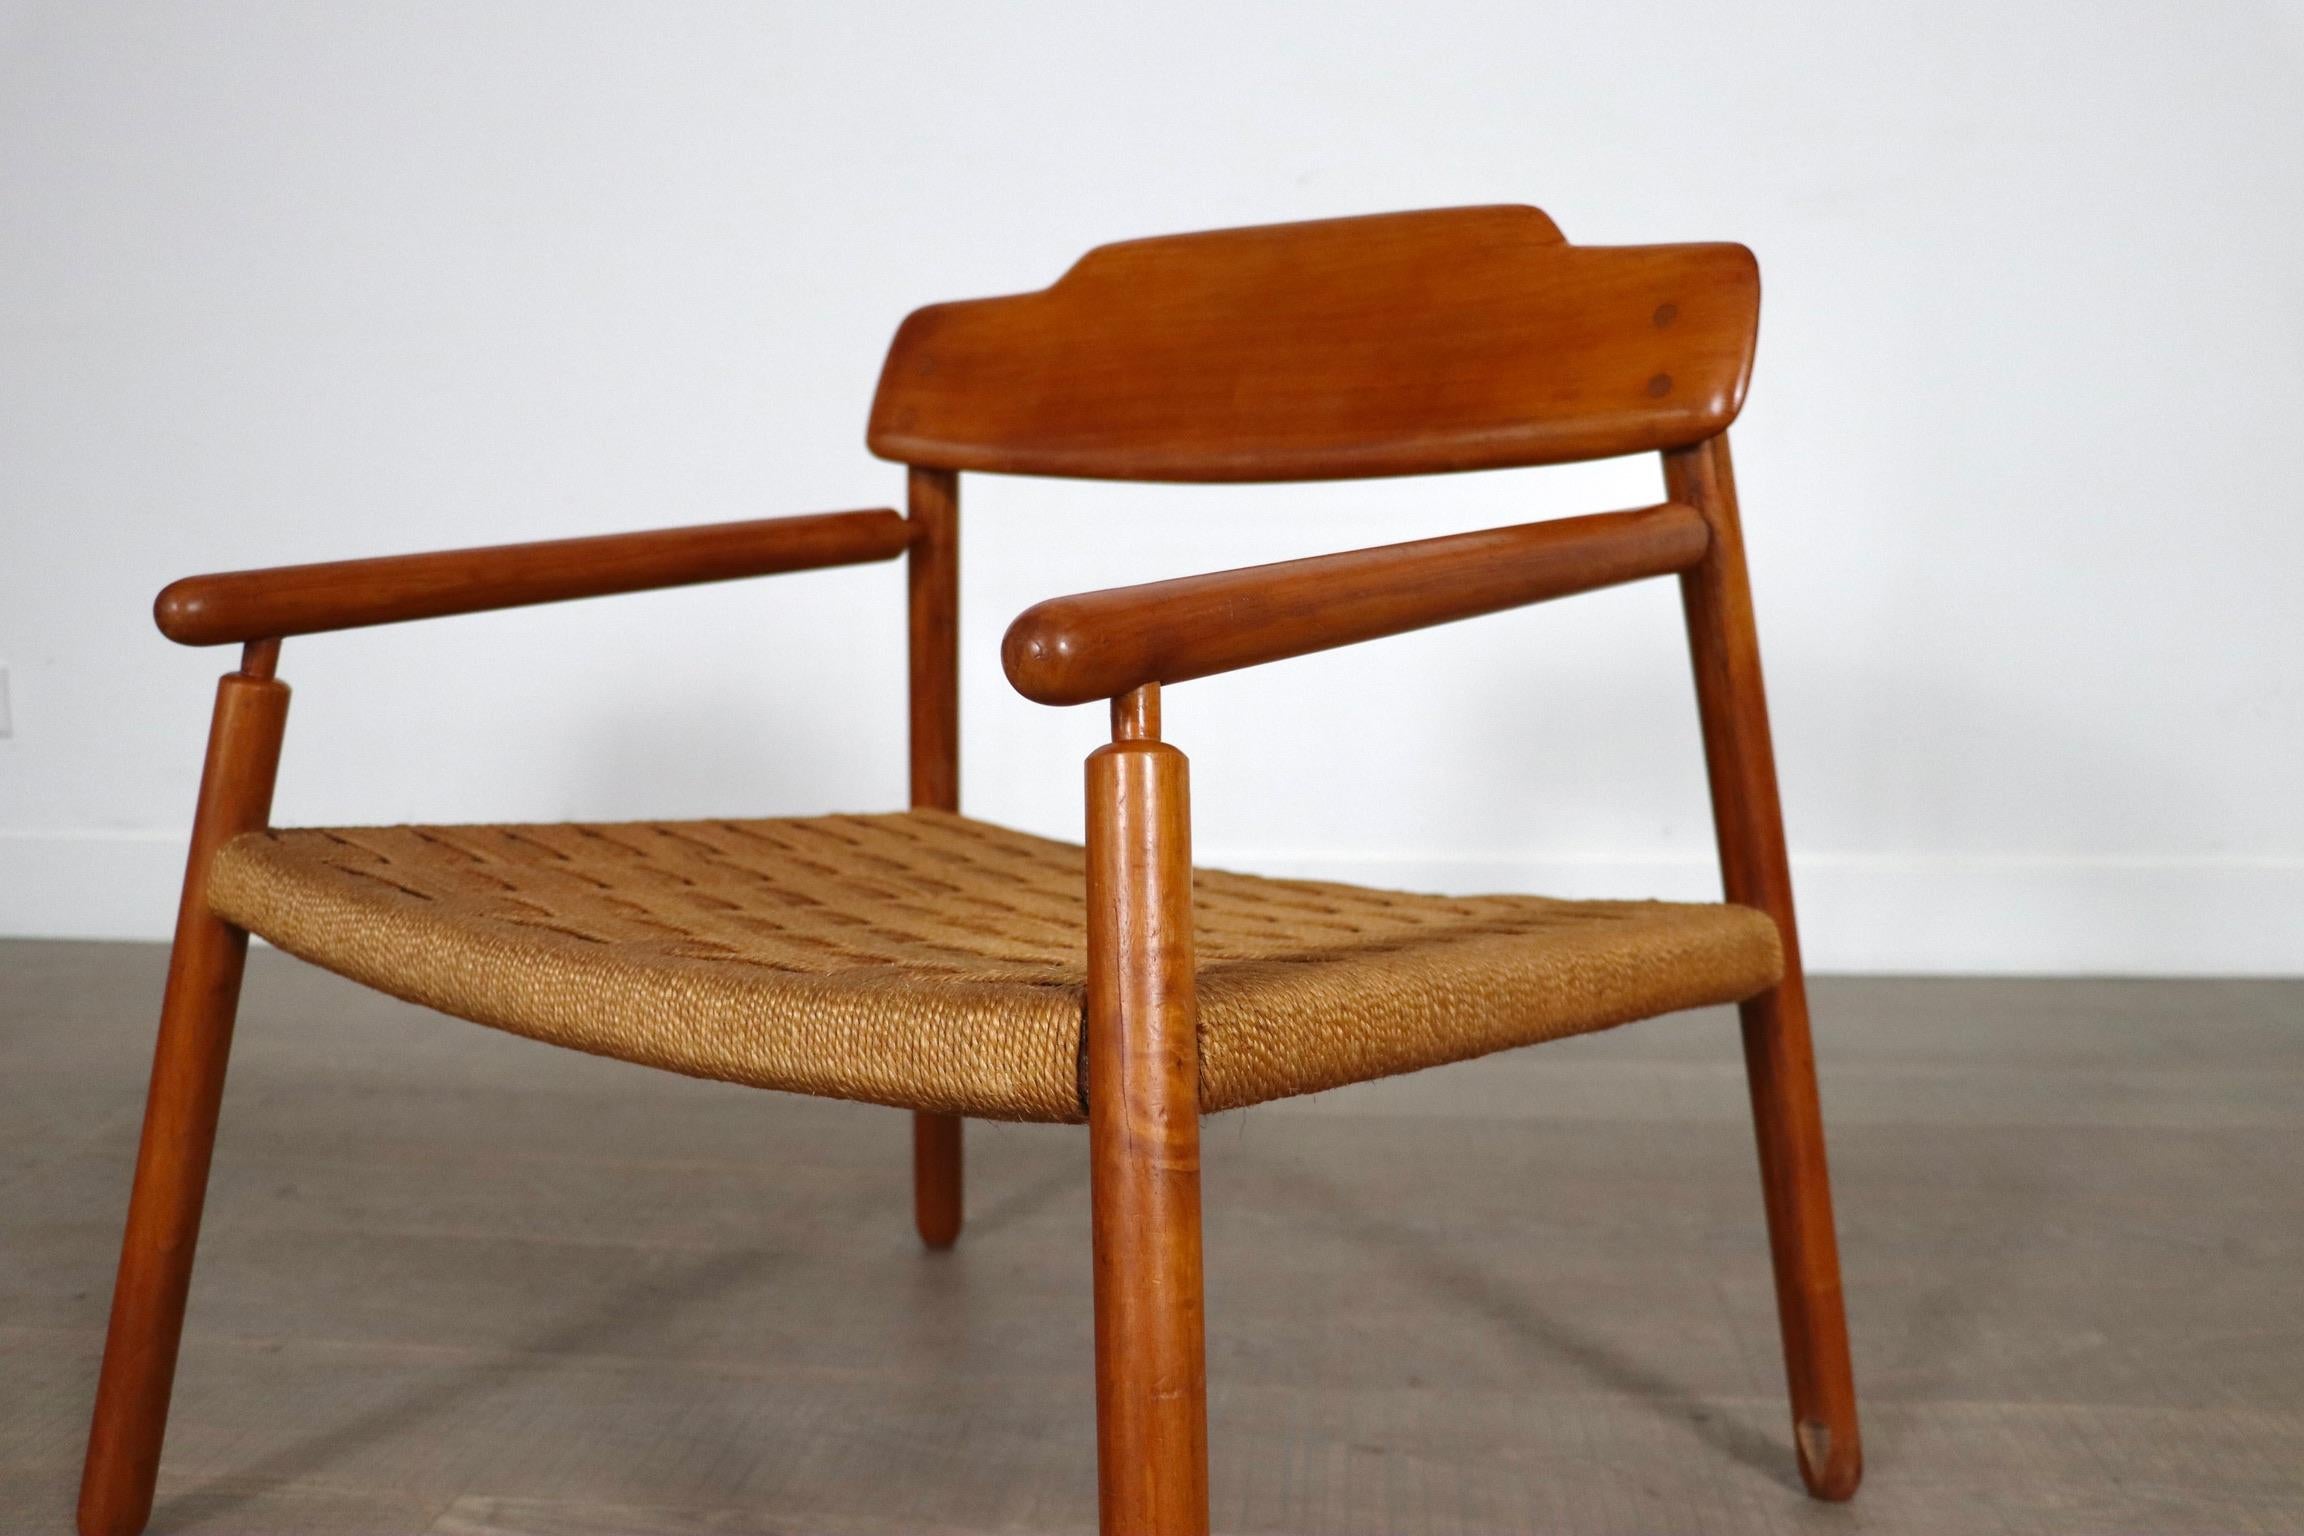 Midcentury Minimalistic Easy Chair In Oak And Papercord, Finland 1950s For Sale 7